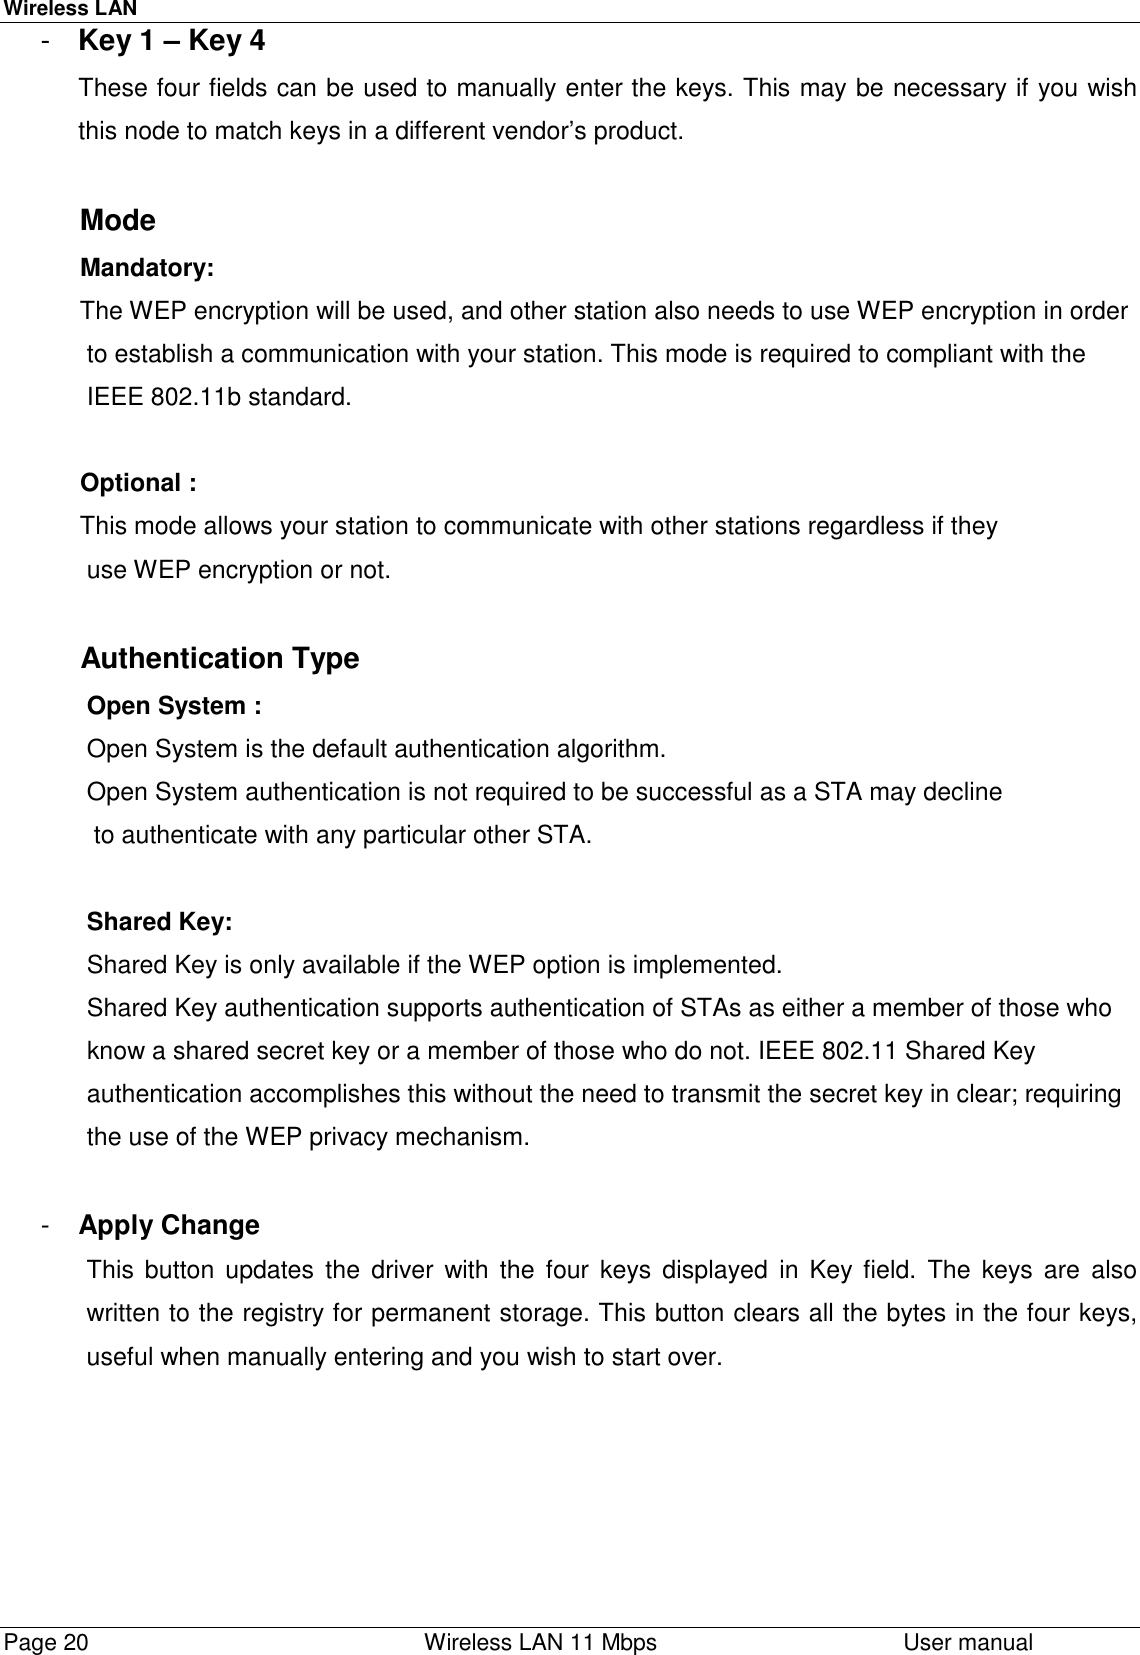 Wireless LANPage 20    Wireless LAN 11 Mbps User manual-  Key 1 – Key 4These four fields can be used to manually enter the keys. This may be necessary if you wishthis node to match keys in a different vendor’s product.           Mode           Mandatory:           The WEP encryption will be used, and other station also needs to use WEP encryption in order            to establish a communication with your station. This mode is required to compliant with the            IEEE 802.11b standard.           Optional :               This mode allows your station to communicate with other stations regardless if they            use WEP encryption or not.           Authentication Type            Open System :            Open System is the default authentication algorithm.            Open System authentication is not required to be successful as a STA may decline             to authenticate with any particular other STA.            Shared Key:            Shared Key is only available if the WEP option is implemented.            Shared Key authentication supports authentication of STAs as either a member of those who            know a shared secret key or a member of those who do not. IEEE 802.11 Shared Key            authentication accomplishes this without the need to transmit the secret key in clear; requiring            the use of the WEP privacy mechanism.-  Apply ChangeThis button updates the driver with the four keys displayed in Key field. The keys are alsowritten to the registry for permanent storage. This button clears all the bytes in the four keys,useful when manually entering and you wish to start over.